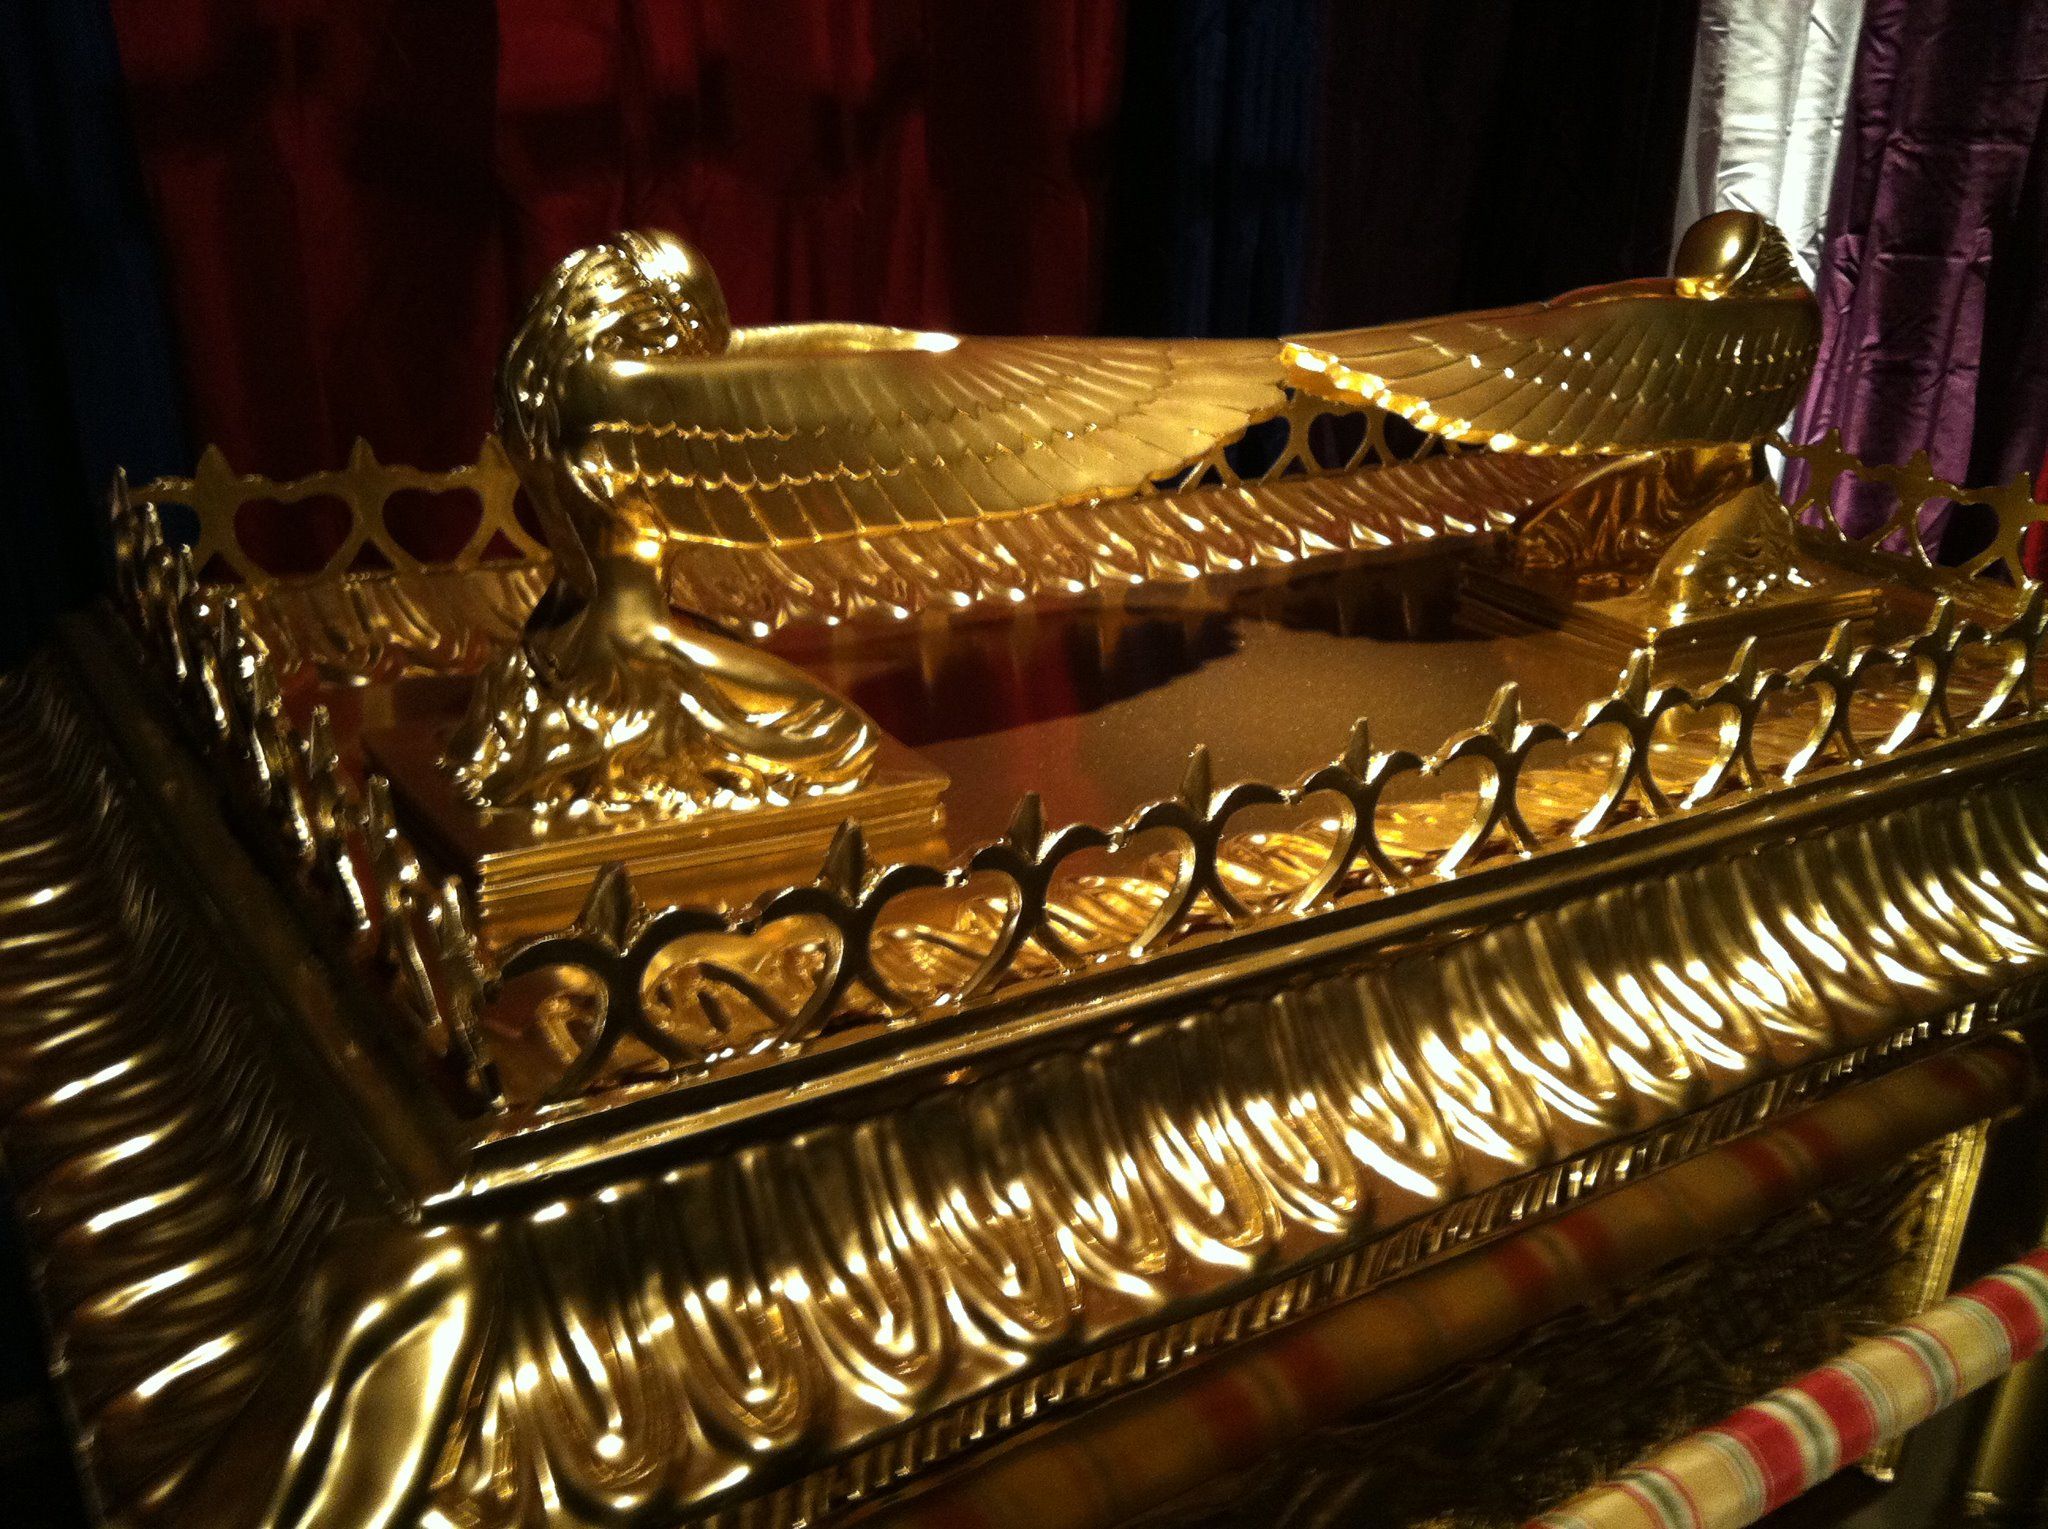 ARK OF THE COVENANT Replicas, Custom Fabrication, SPECIAL EFFECTS